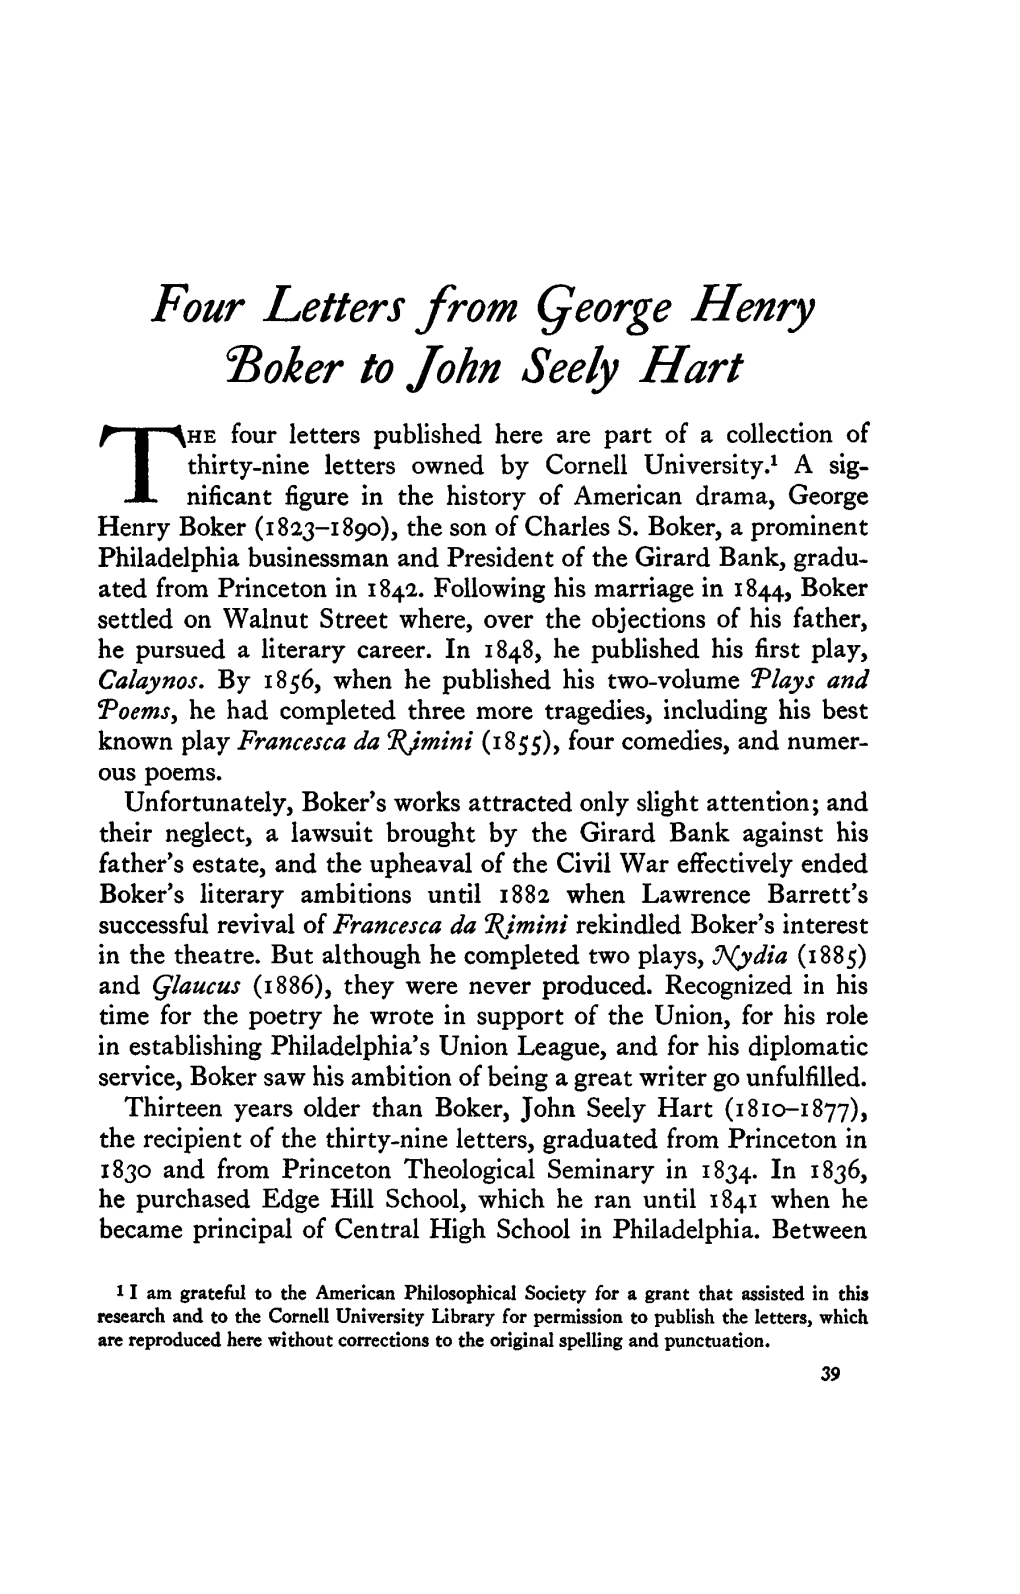 Four Letters from Qeorge Henry Boker to John Seely Hart